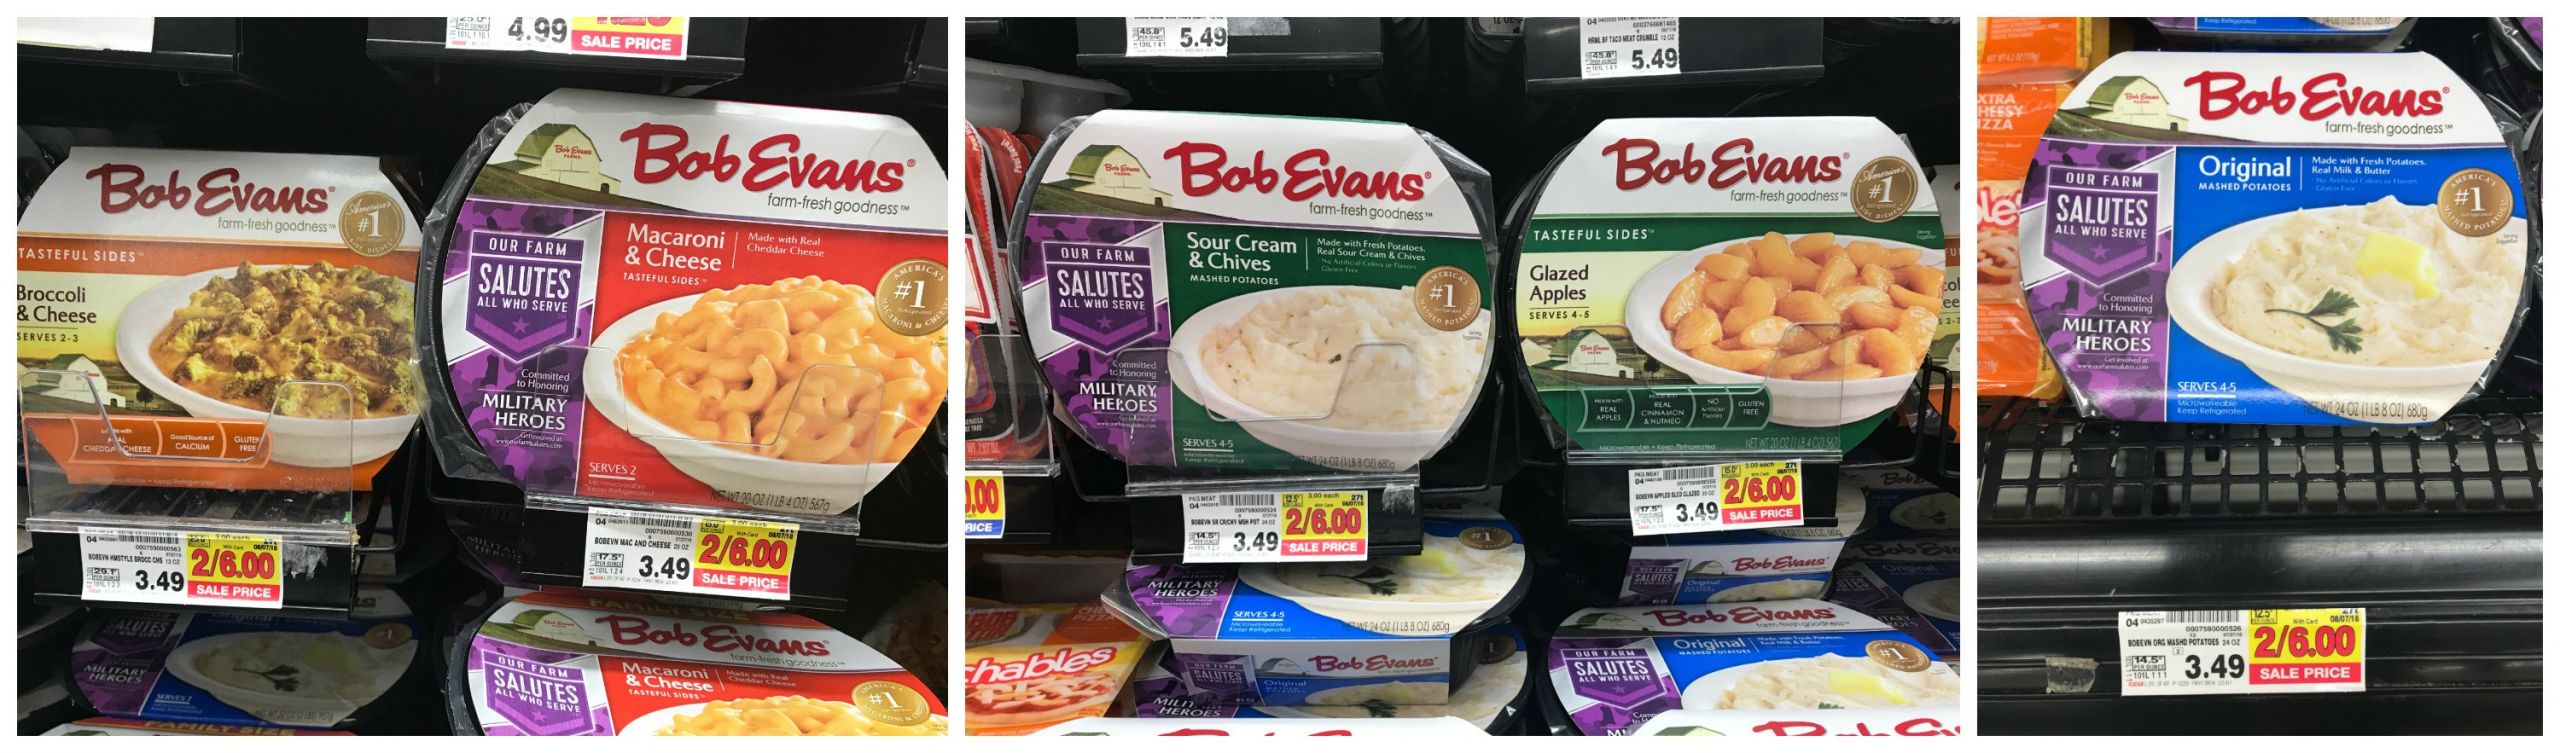 Bob Evans Refrigerated Side Dishes Inspirational Bob Evans Refrigerated Side Dishes Just $2 50 Each at